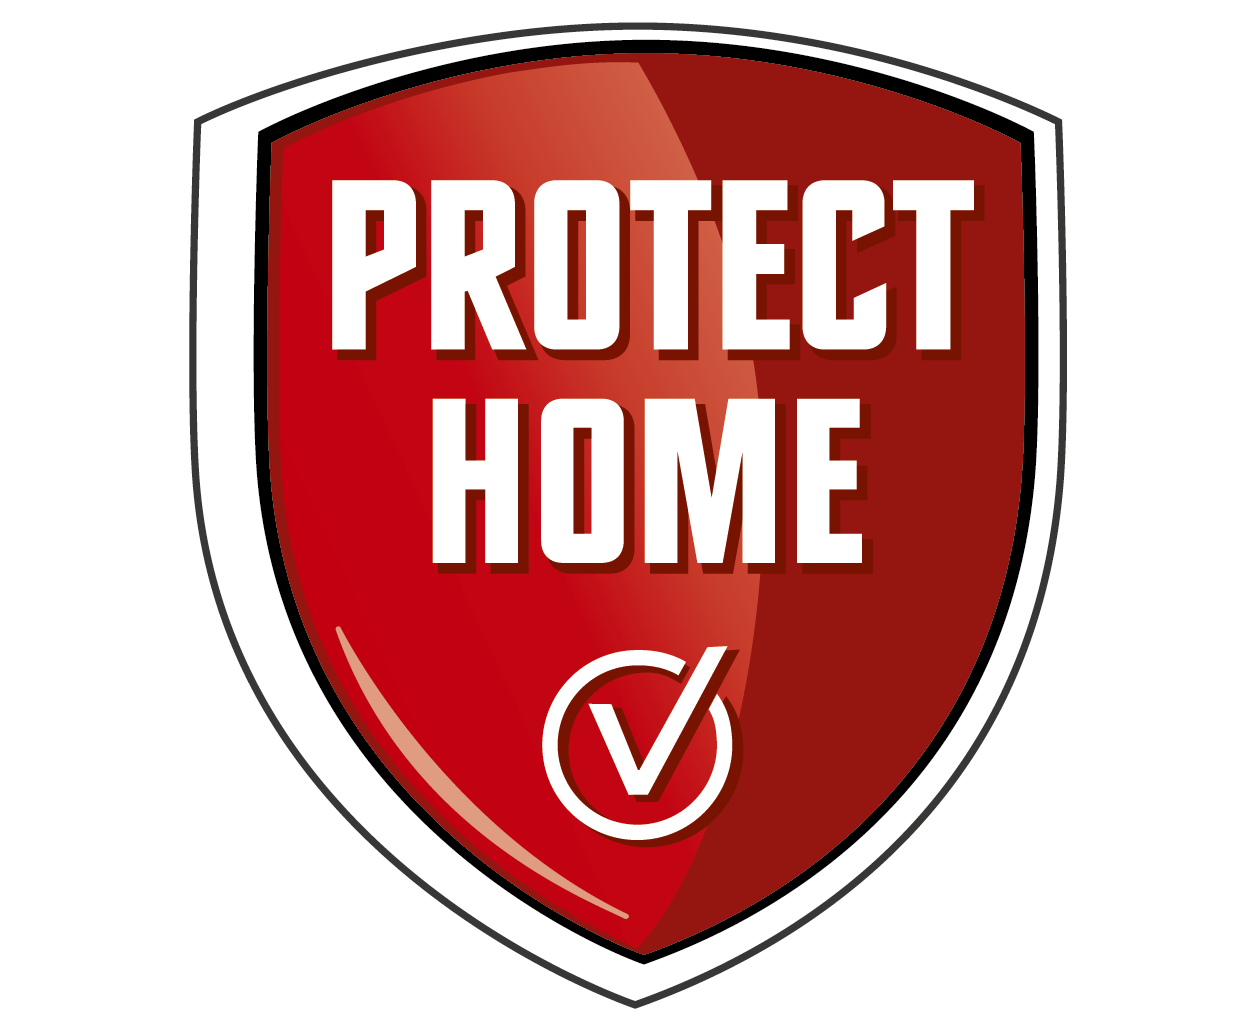 Protect home